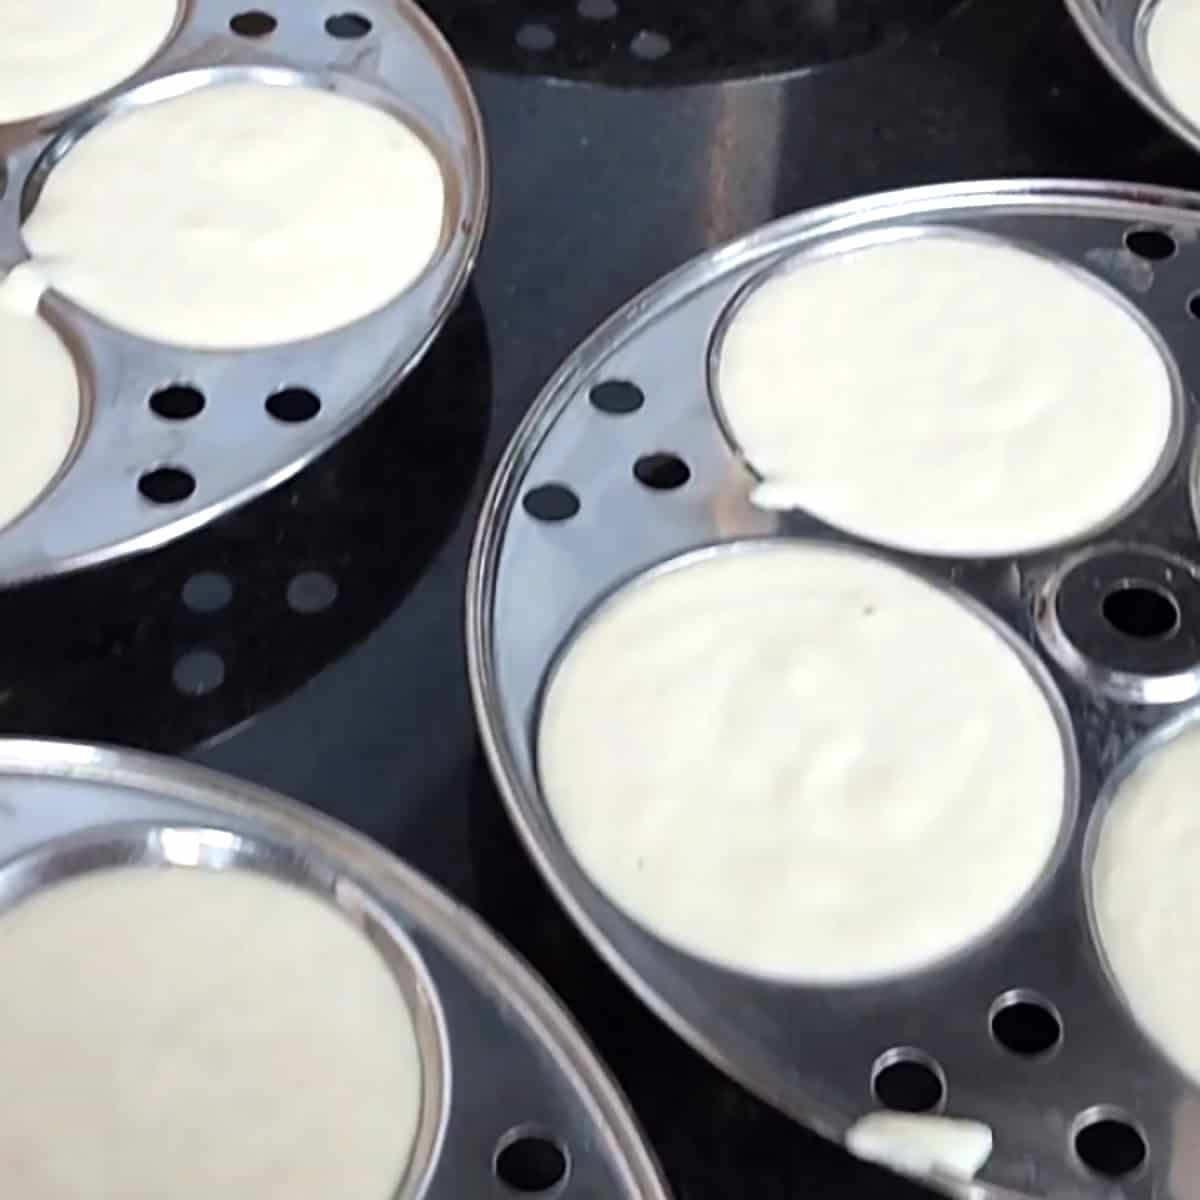 Add idli batter to the idly plates or moulds.